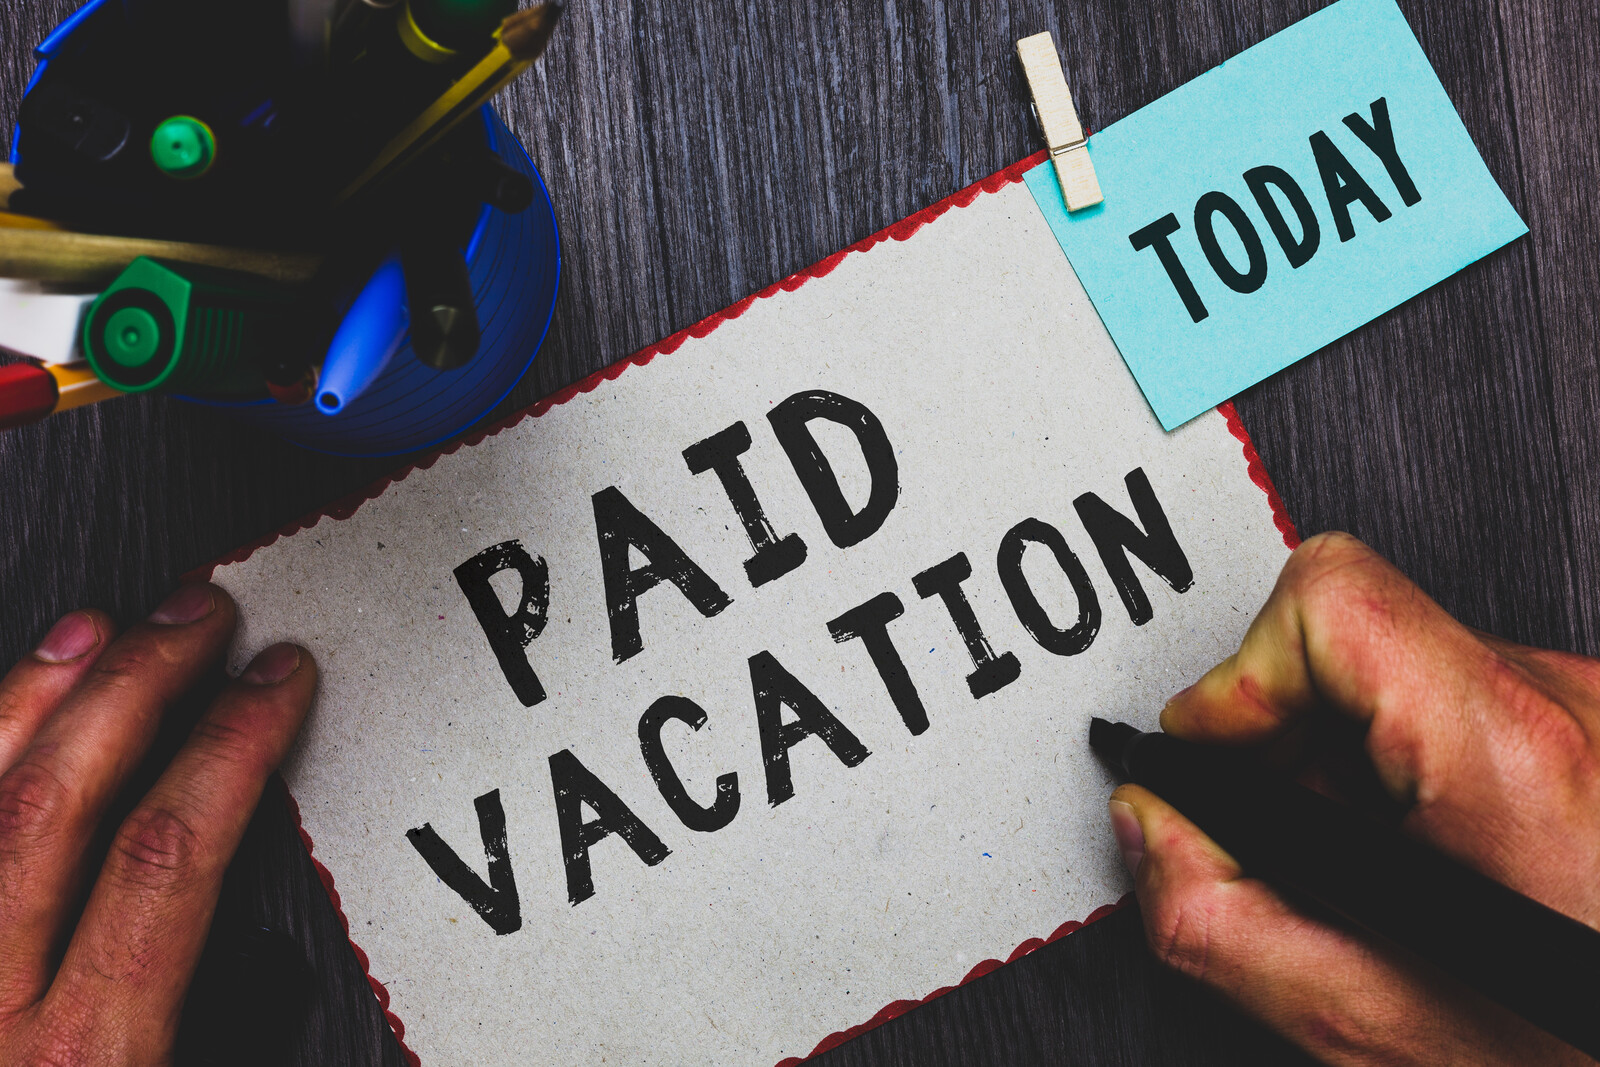 Vacation pay after quitting job